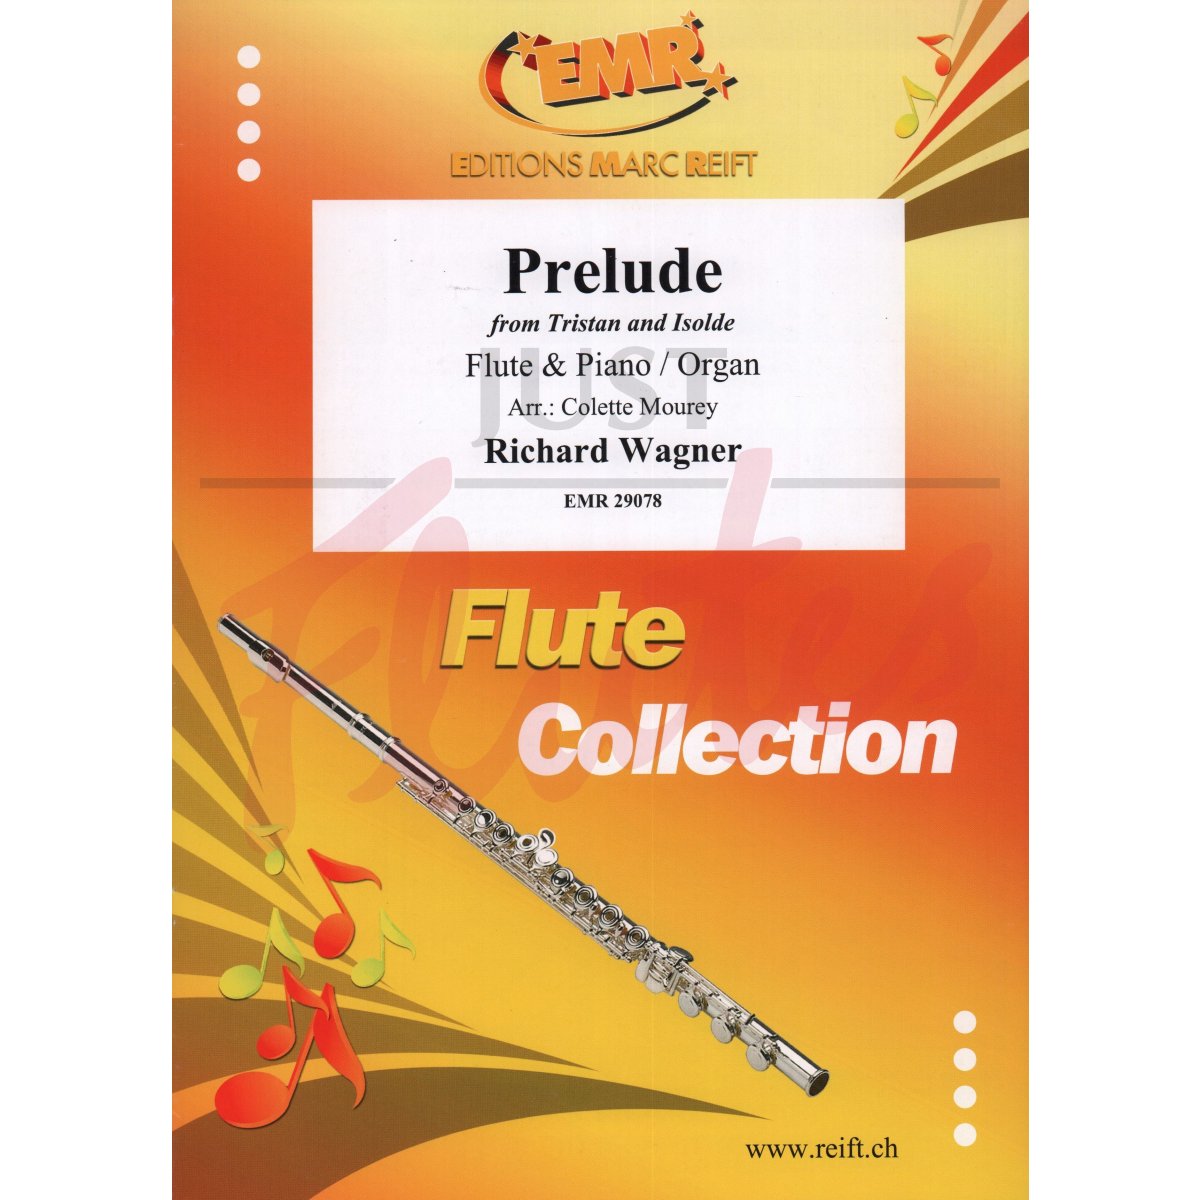 Prelude from Tristan and Isolde for Flute and Piano